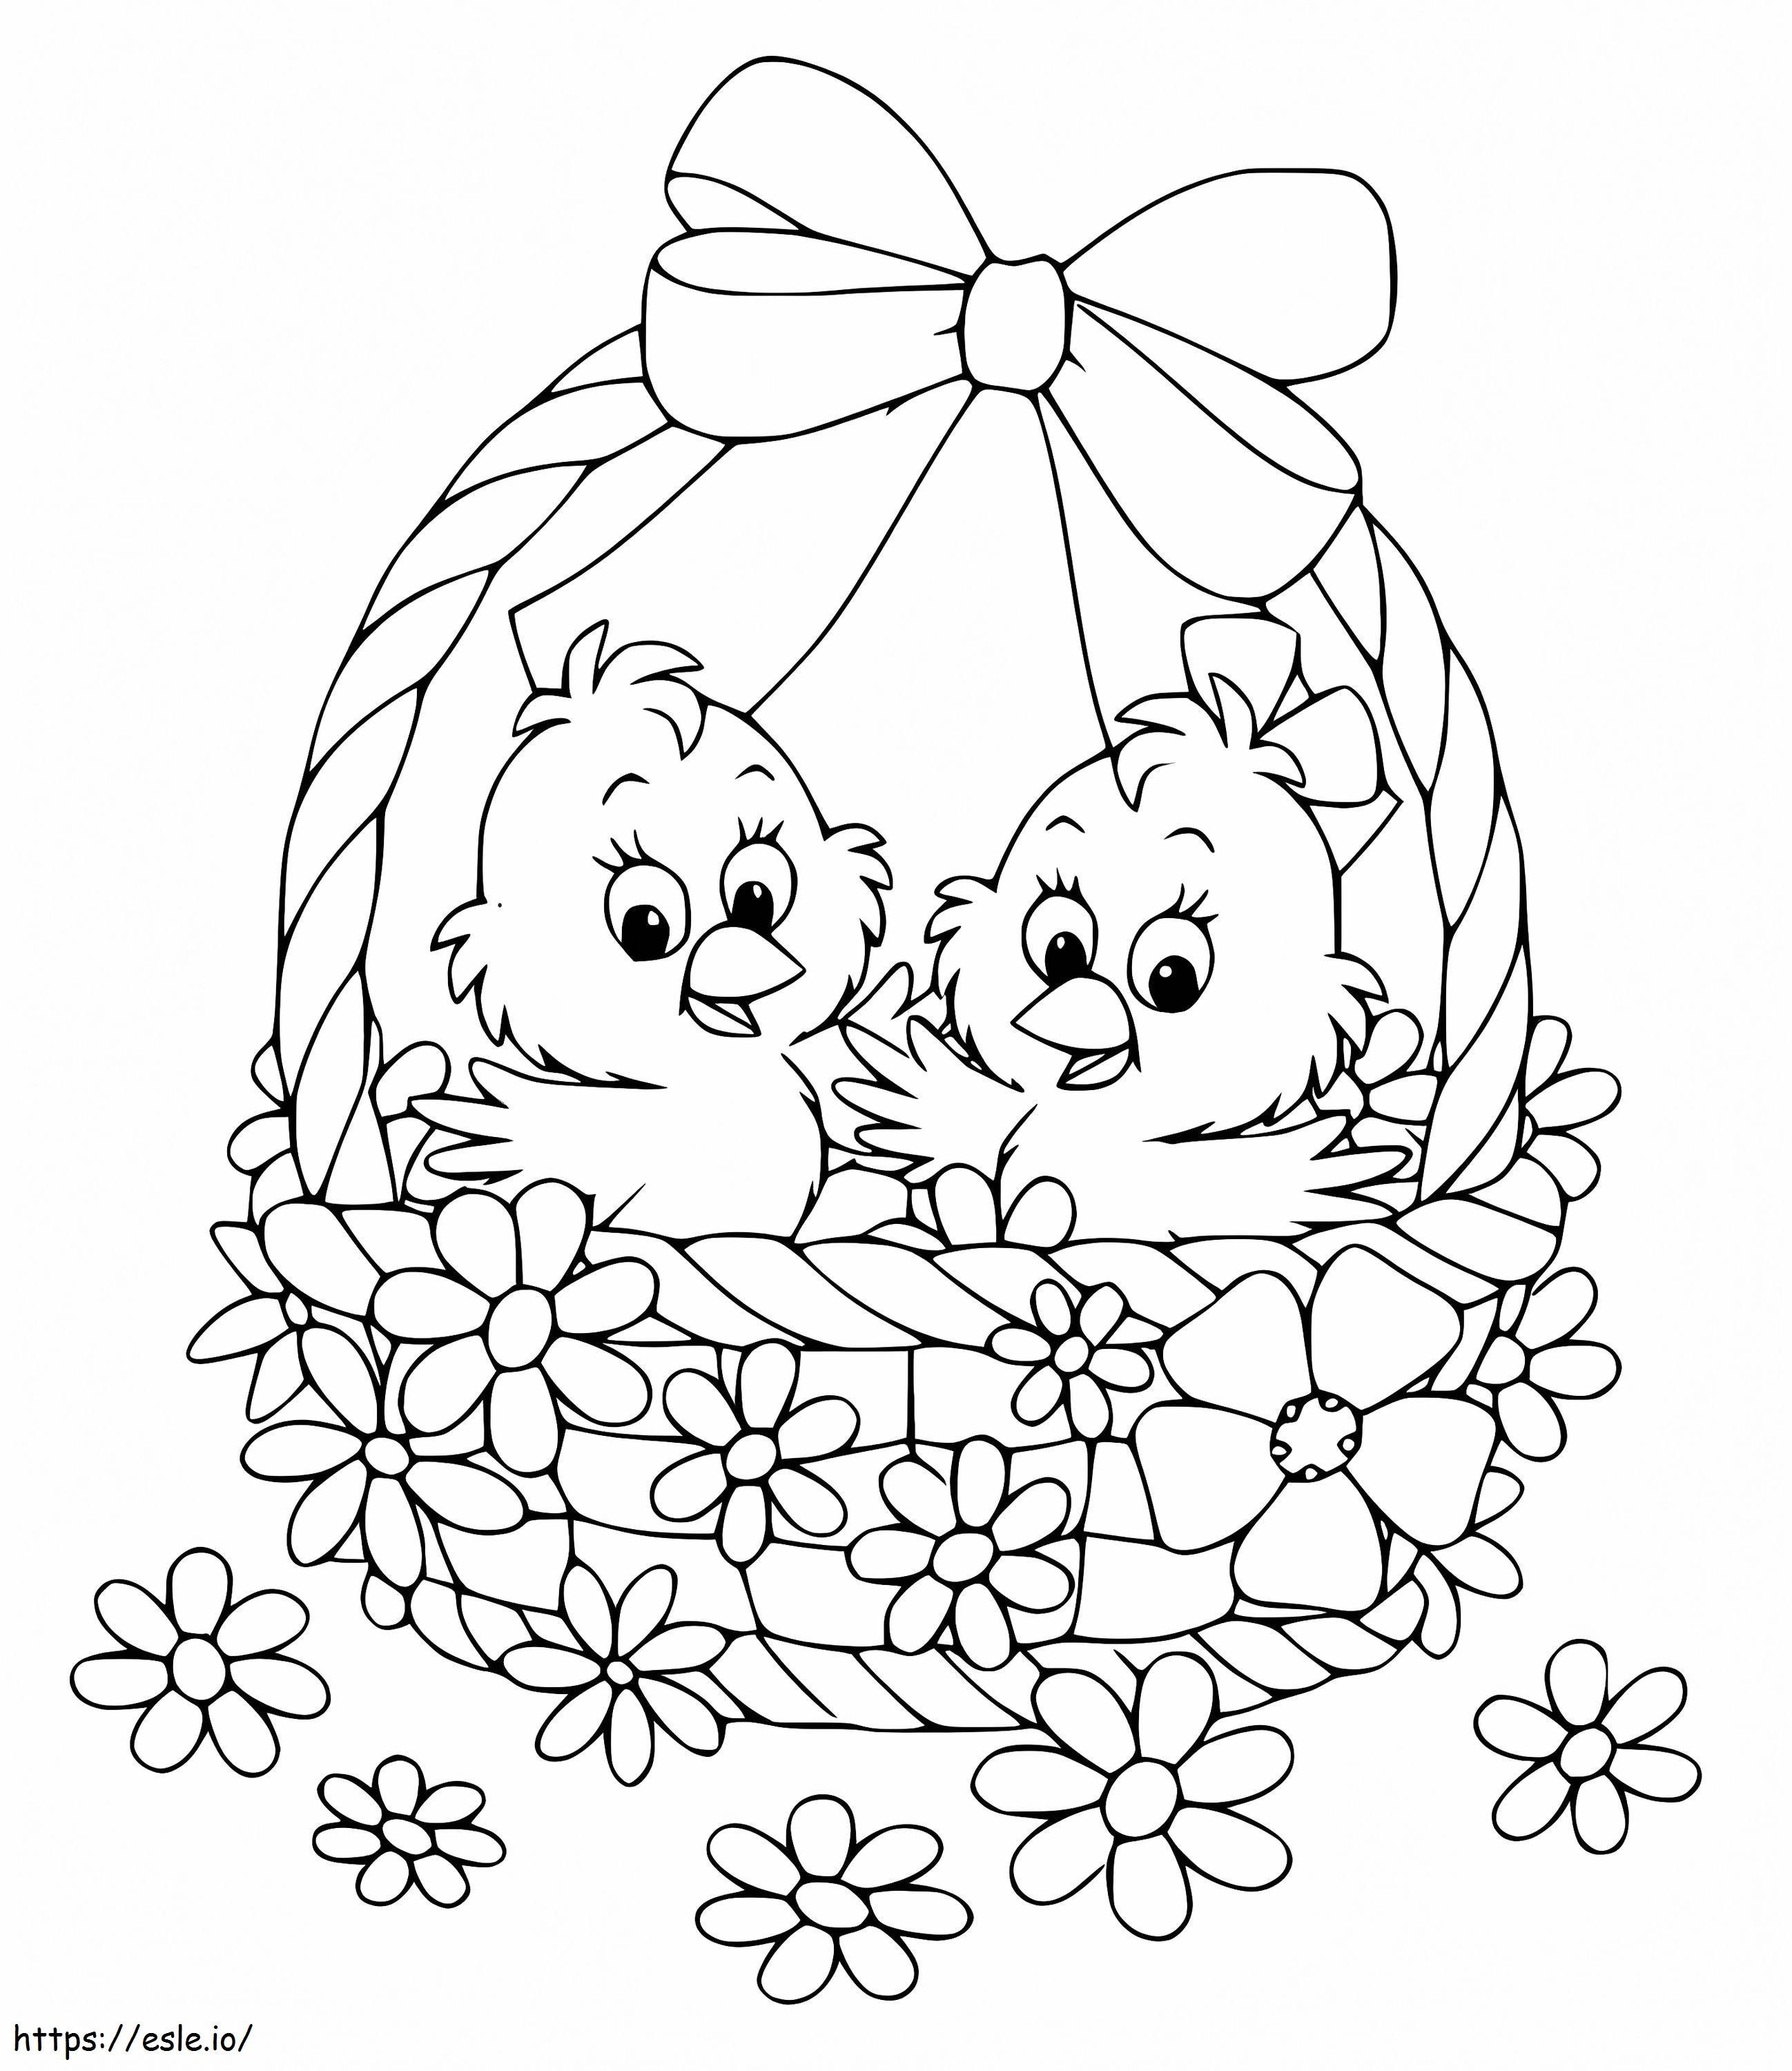 Adorable Easter Chicks coloring page